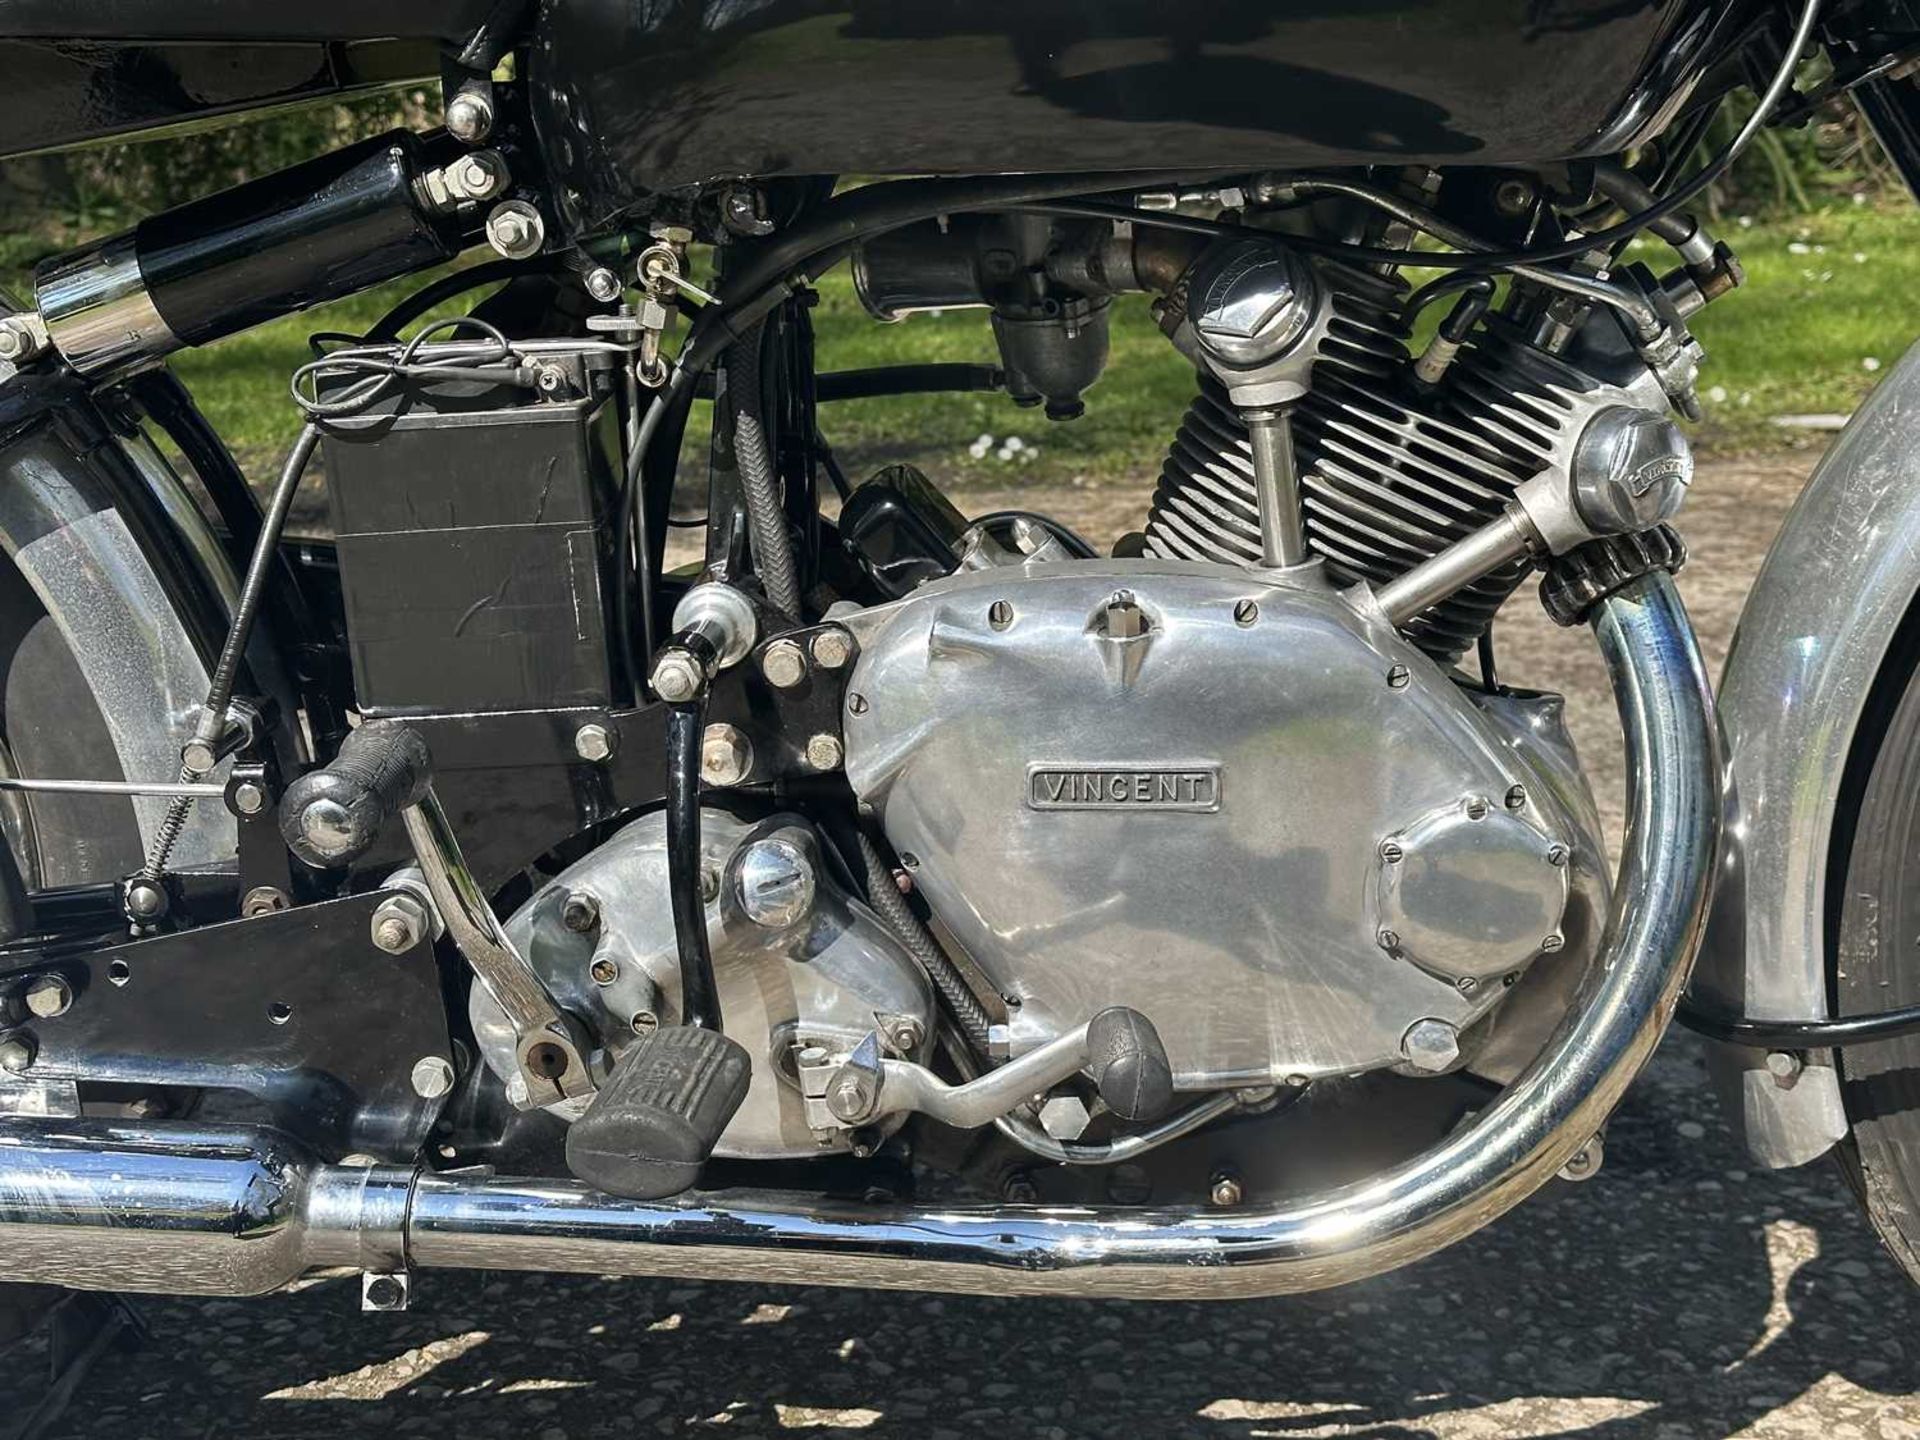 1952 Vincent Comet Comes with an old style log book and dating certificate from the Vincent Owners C - Image 19 of 29